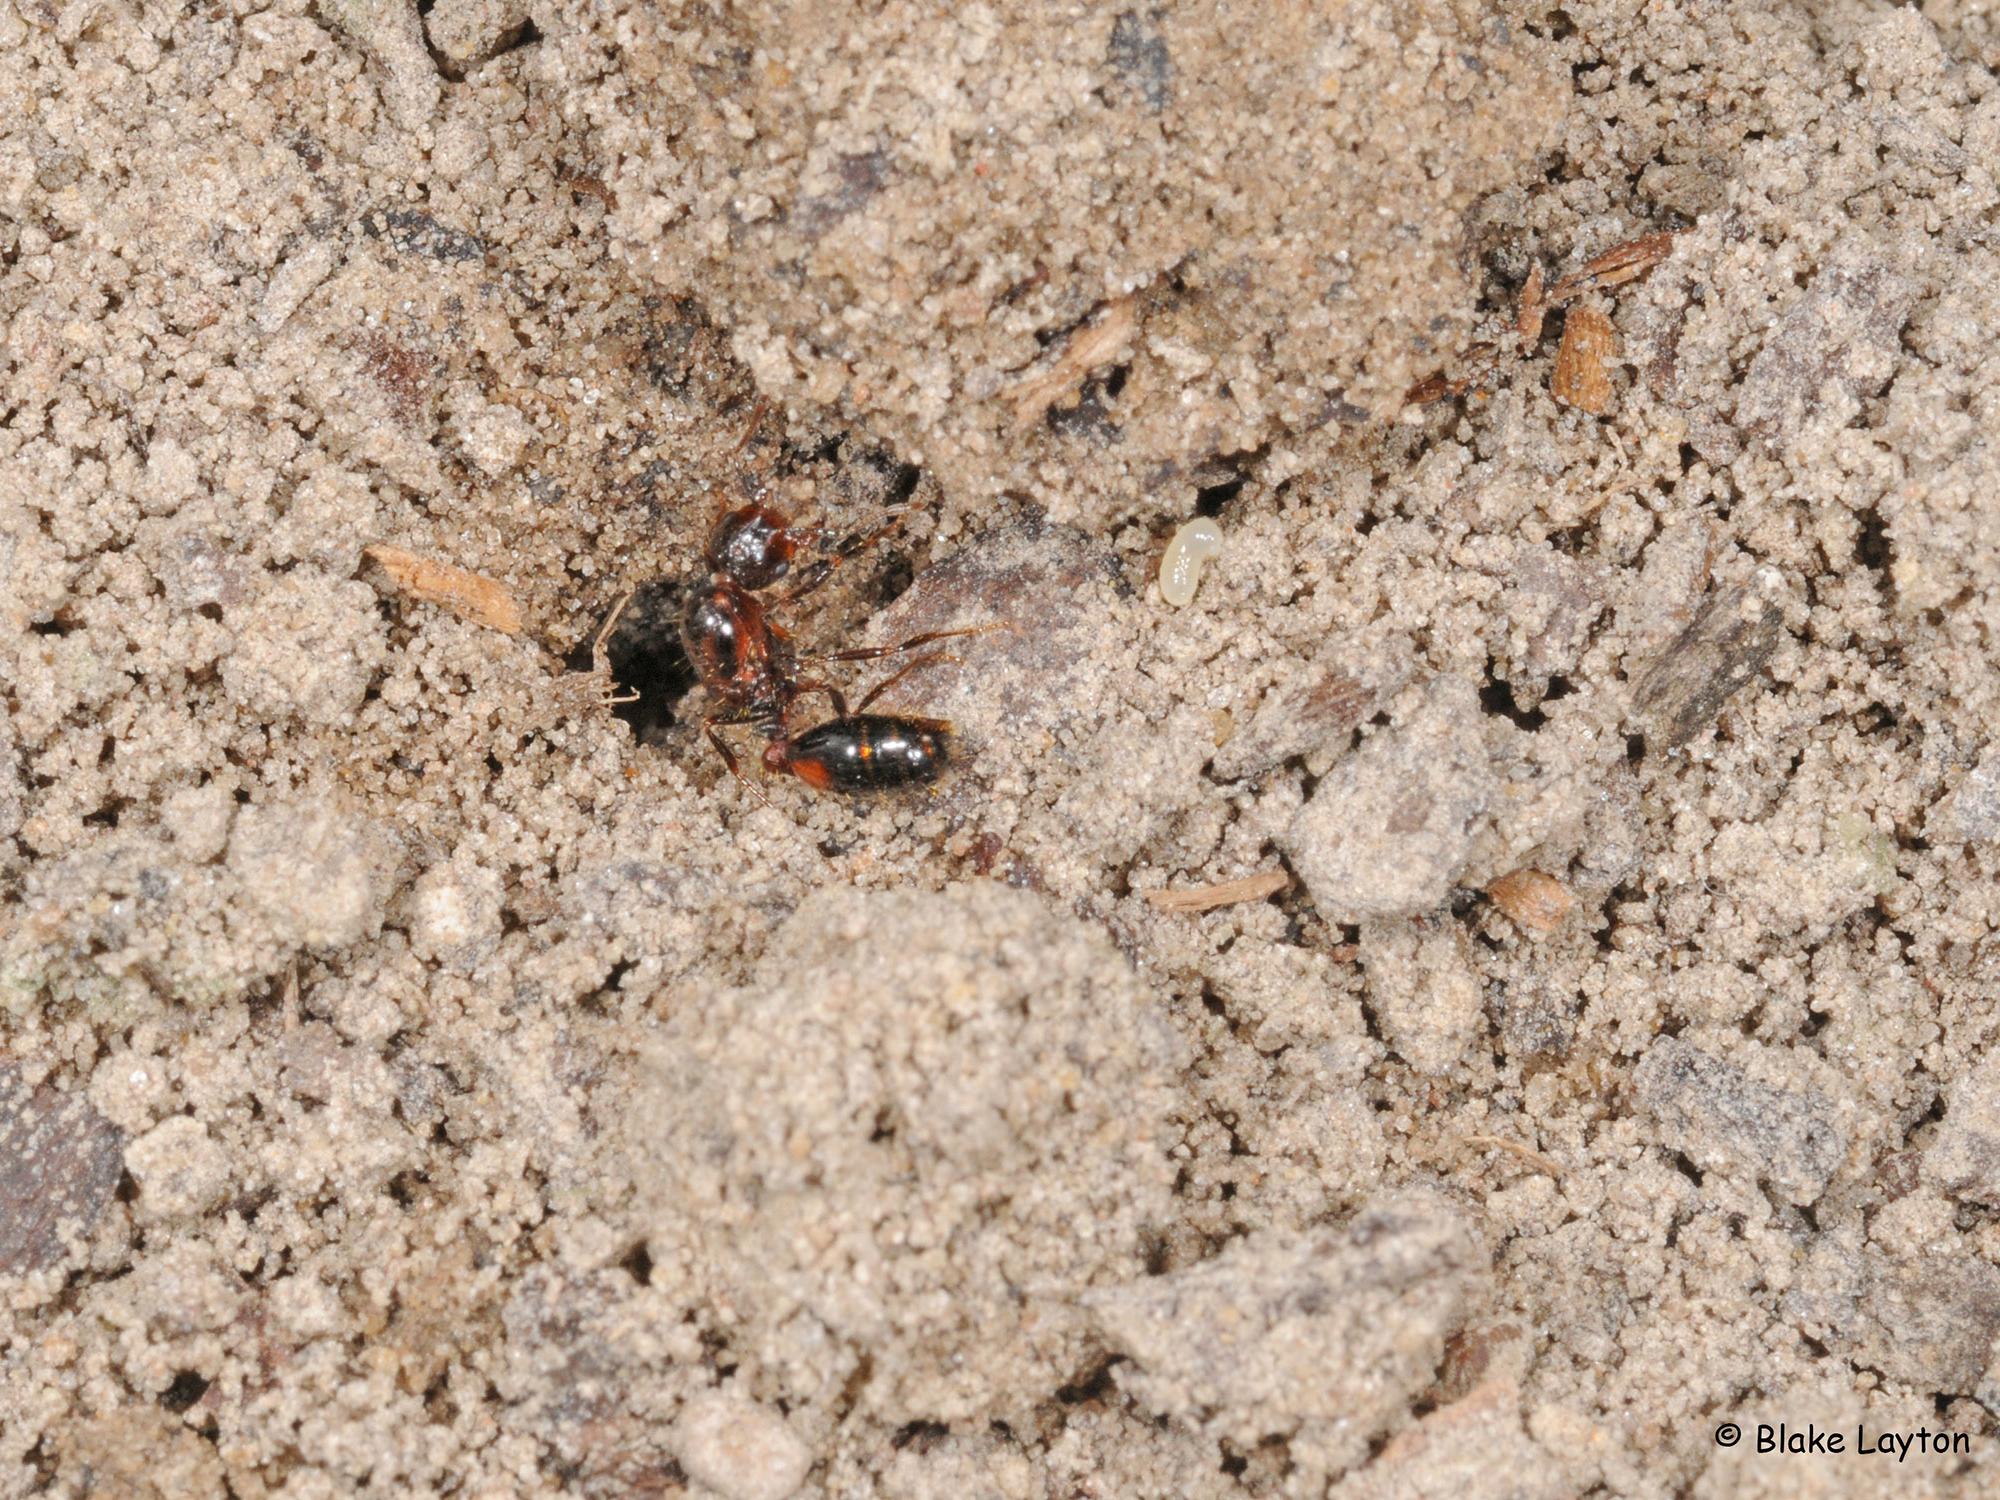 An Imported Fire Ant queen digging in soil.